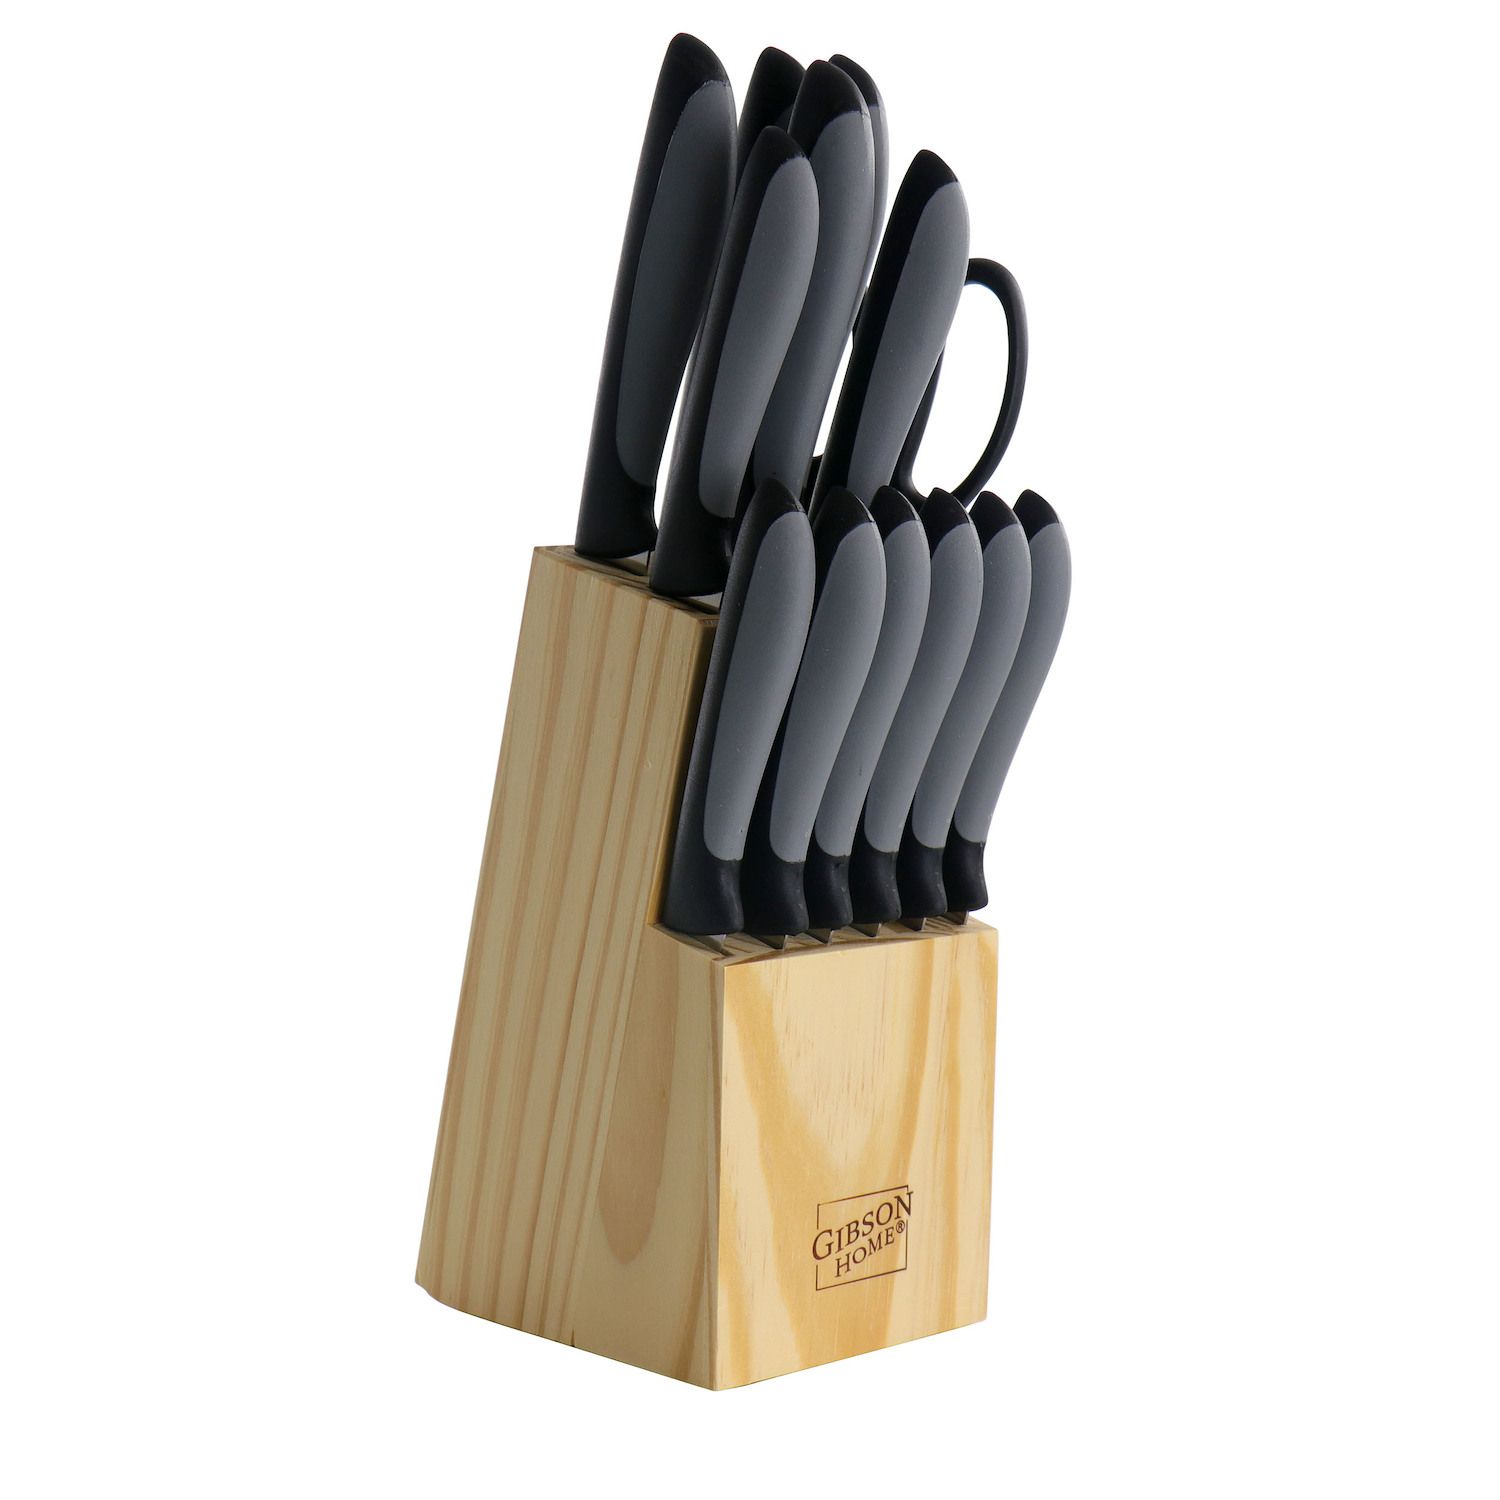 Oster Granger 5 Piece Stainless Steel Cutlery Knife Set with Half Moon  Natural Wood Block